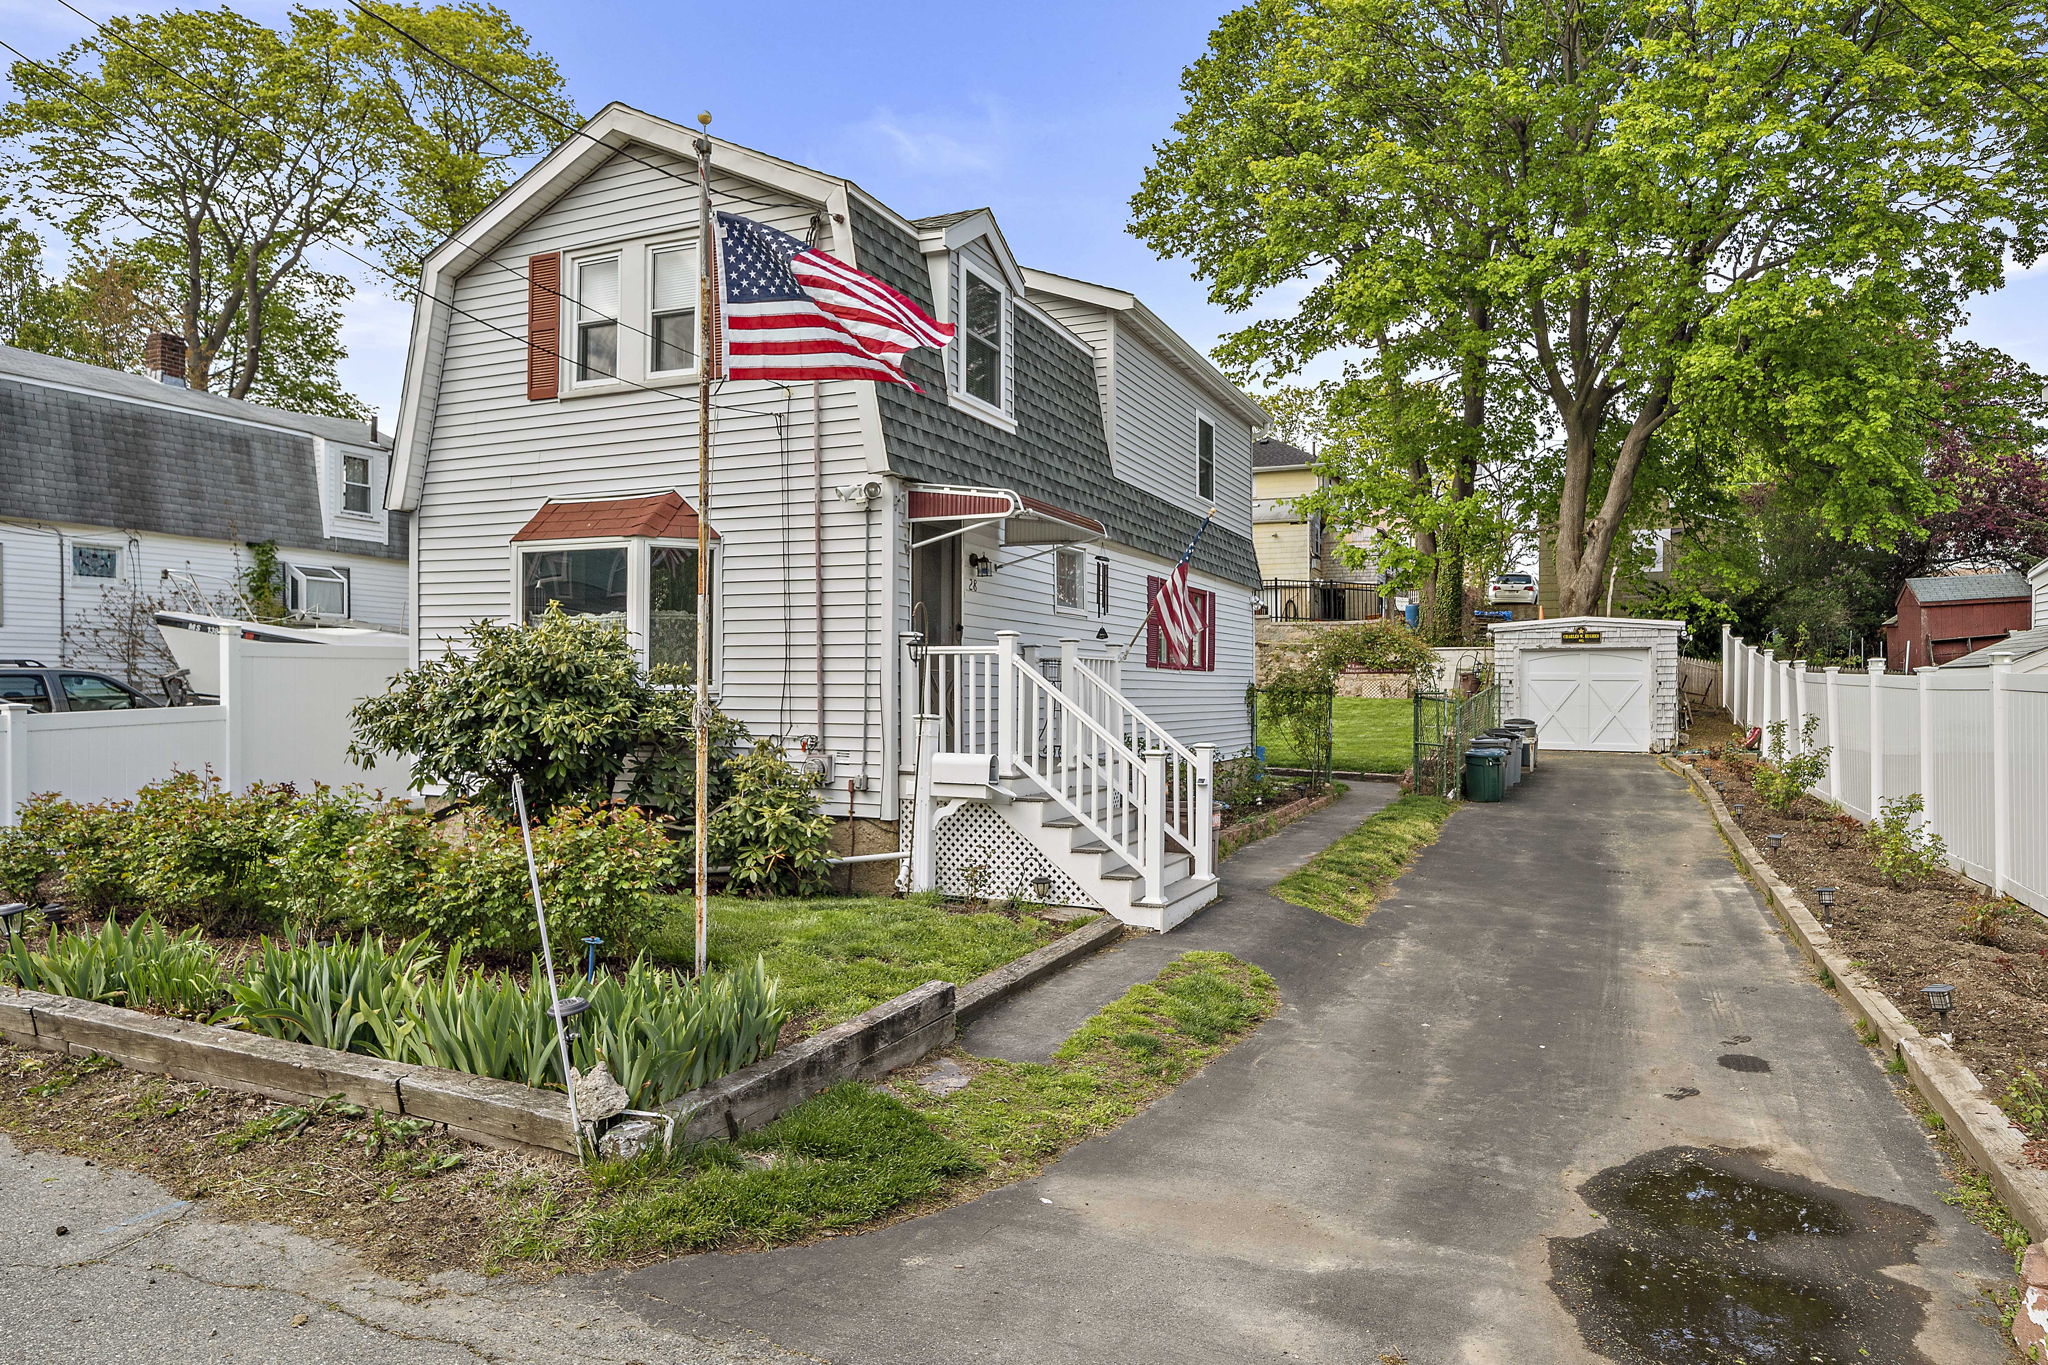  28 Shennen St, Quincy, MA 02169, US